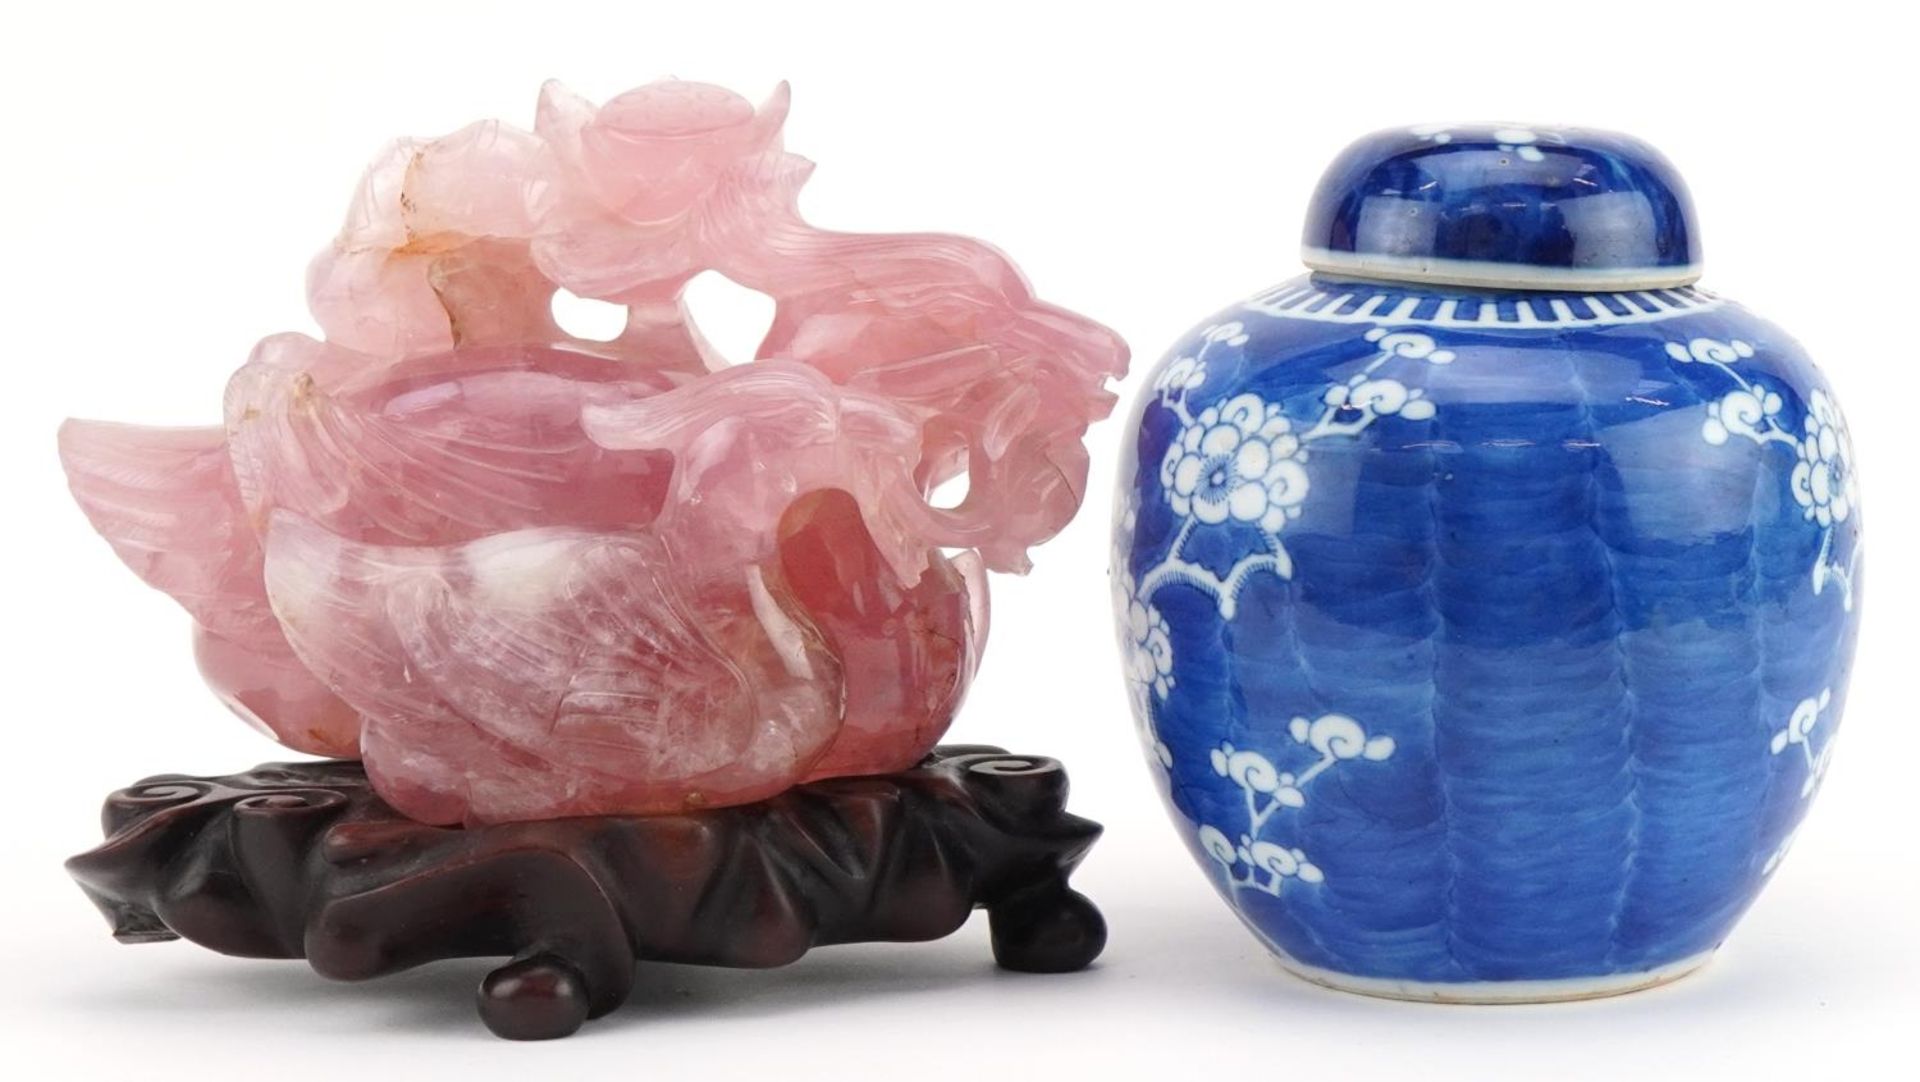 Chinese blue and white porcelain prunus pattern ginger jar and cover and a large pink jade/jadeite - Image 5 of 7